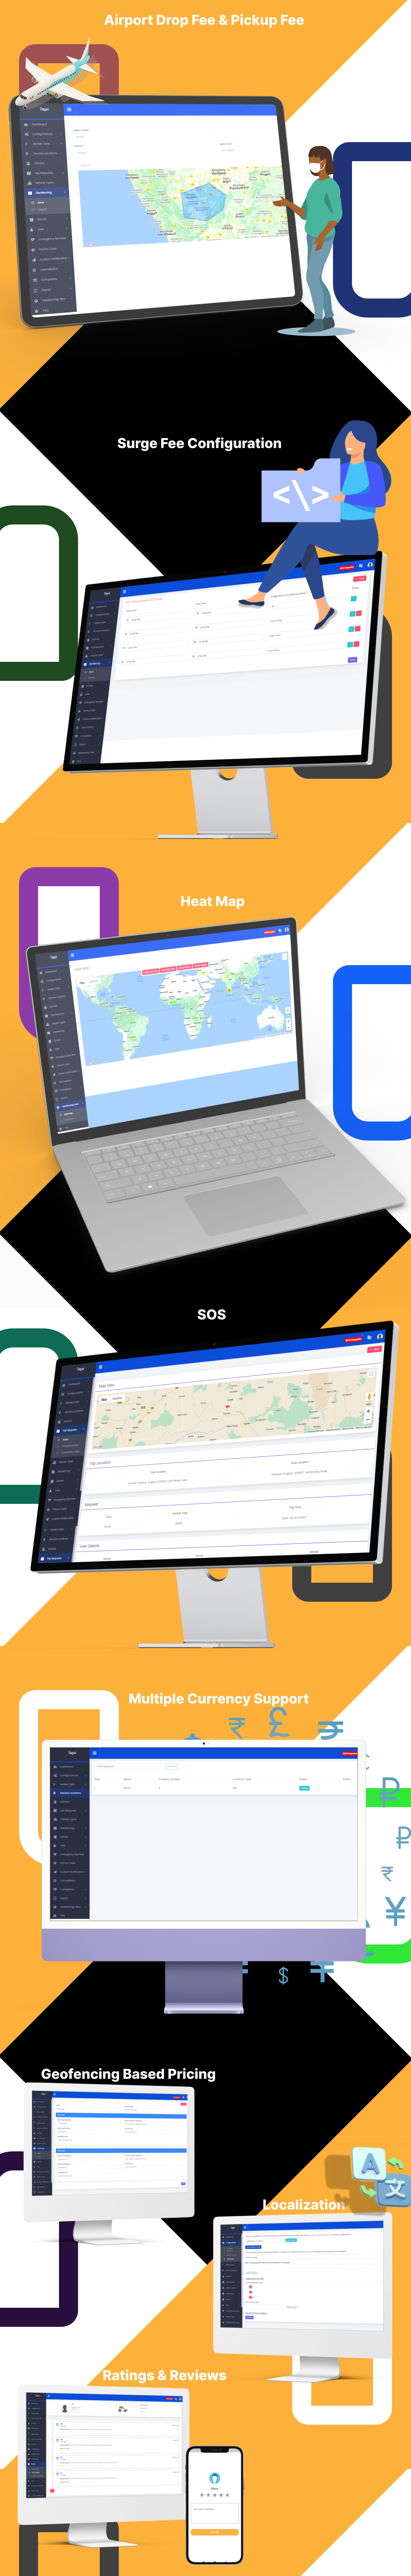 taxi-dispatch-software-features